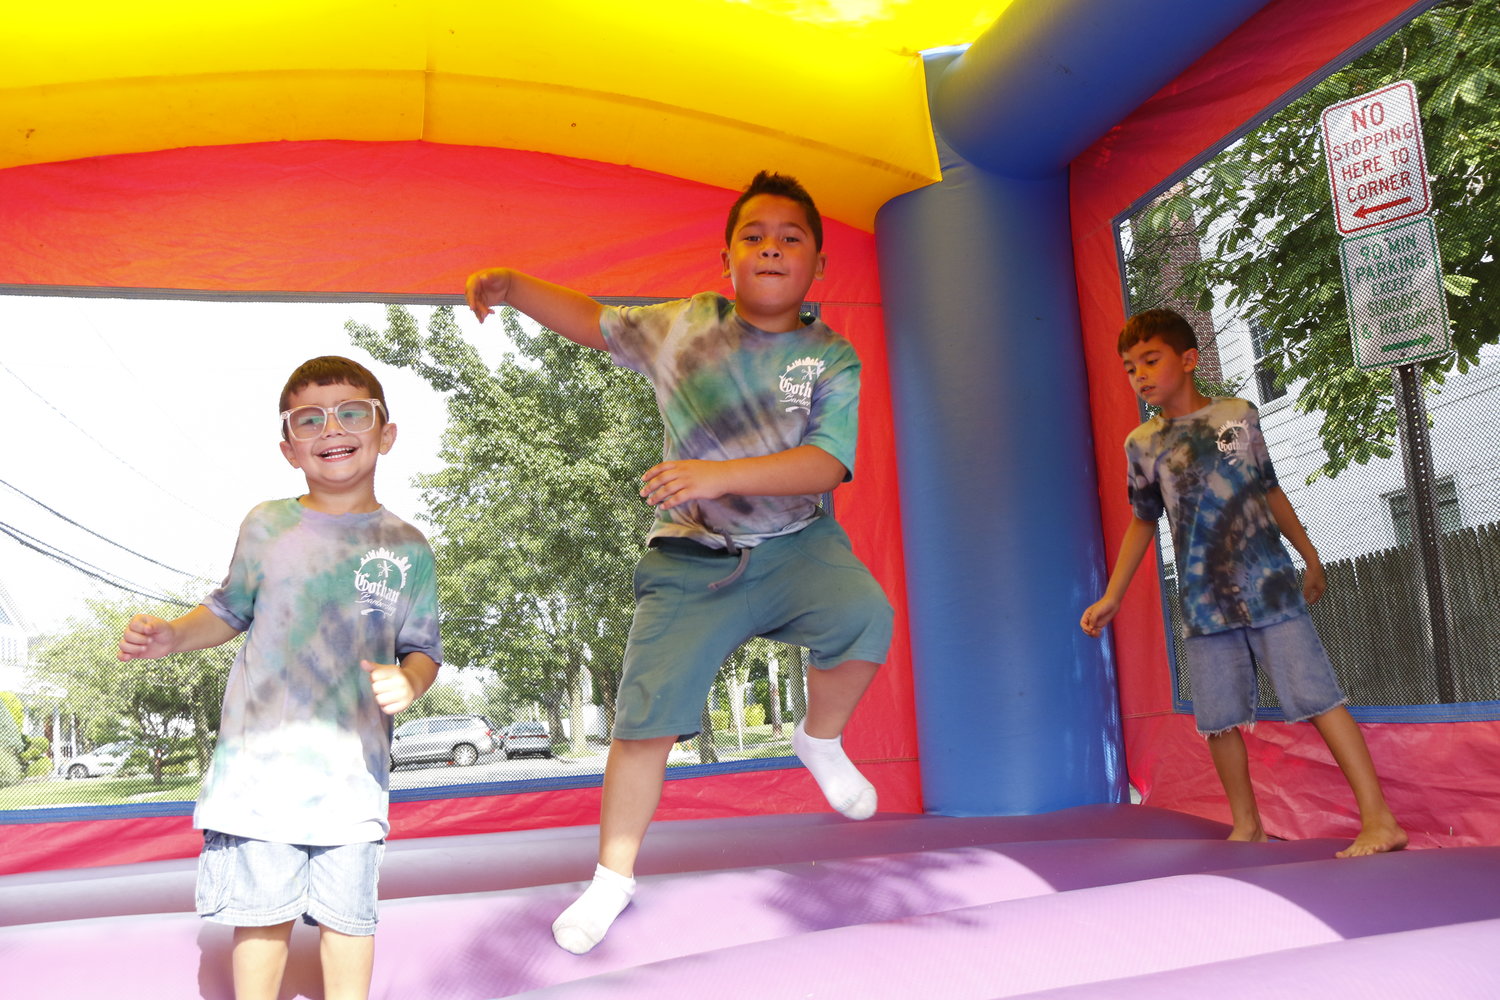 Jiovani Torres, 4, left, Mason Clinton, 8, and Julian Torres, 7, enjoyed the bouncy house during Gotham Barbershop’s grand opening in West Hempstead last Saturday.